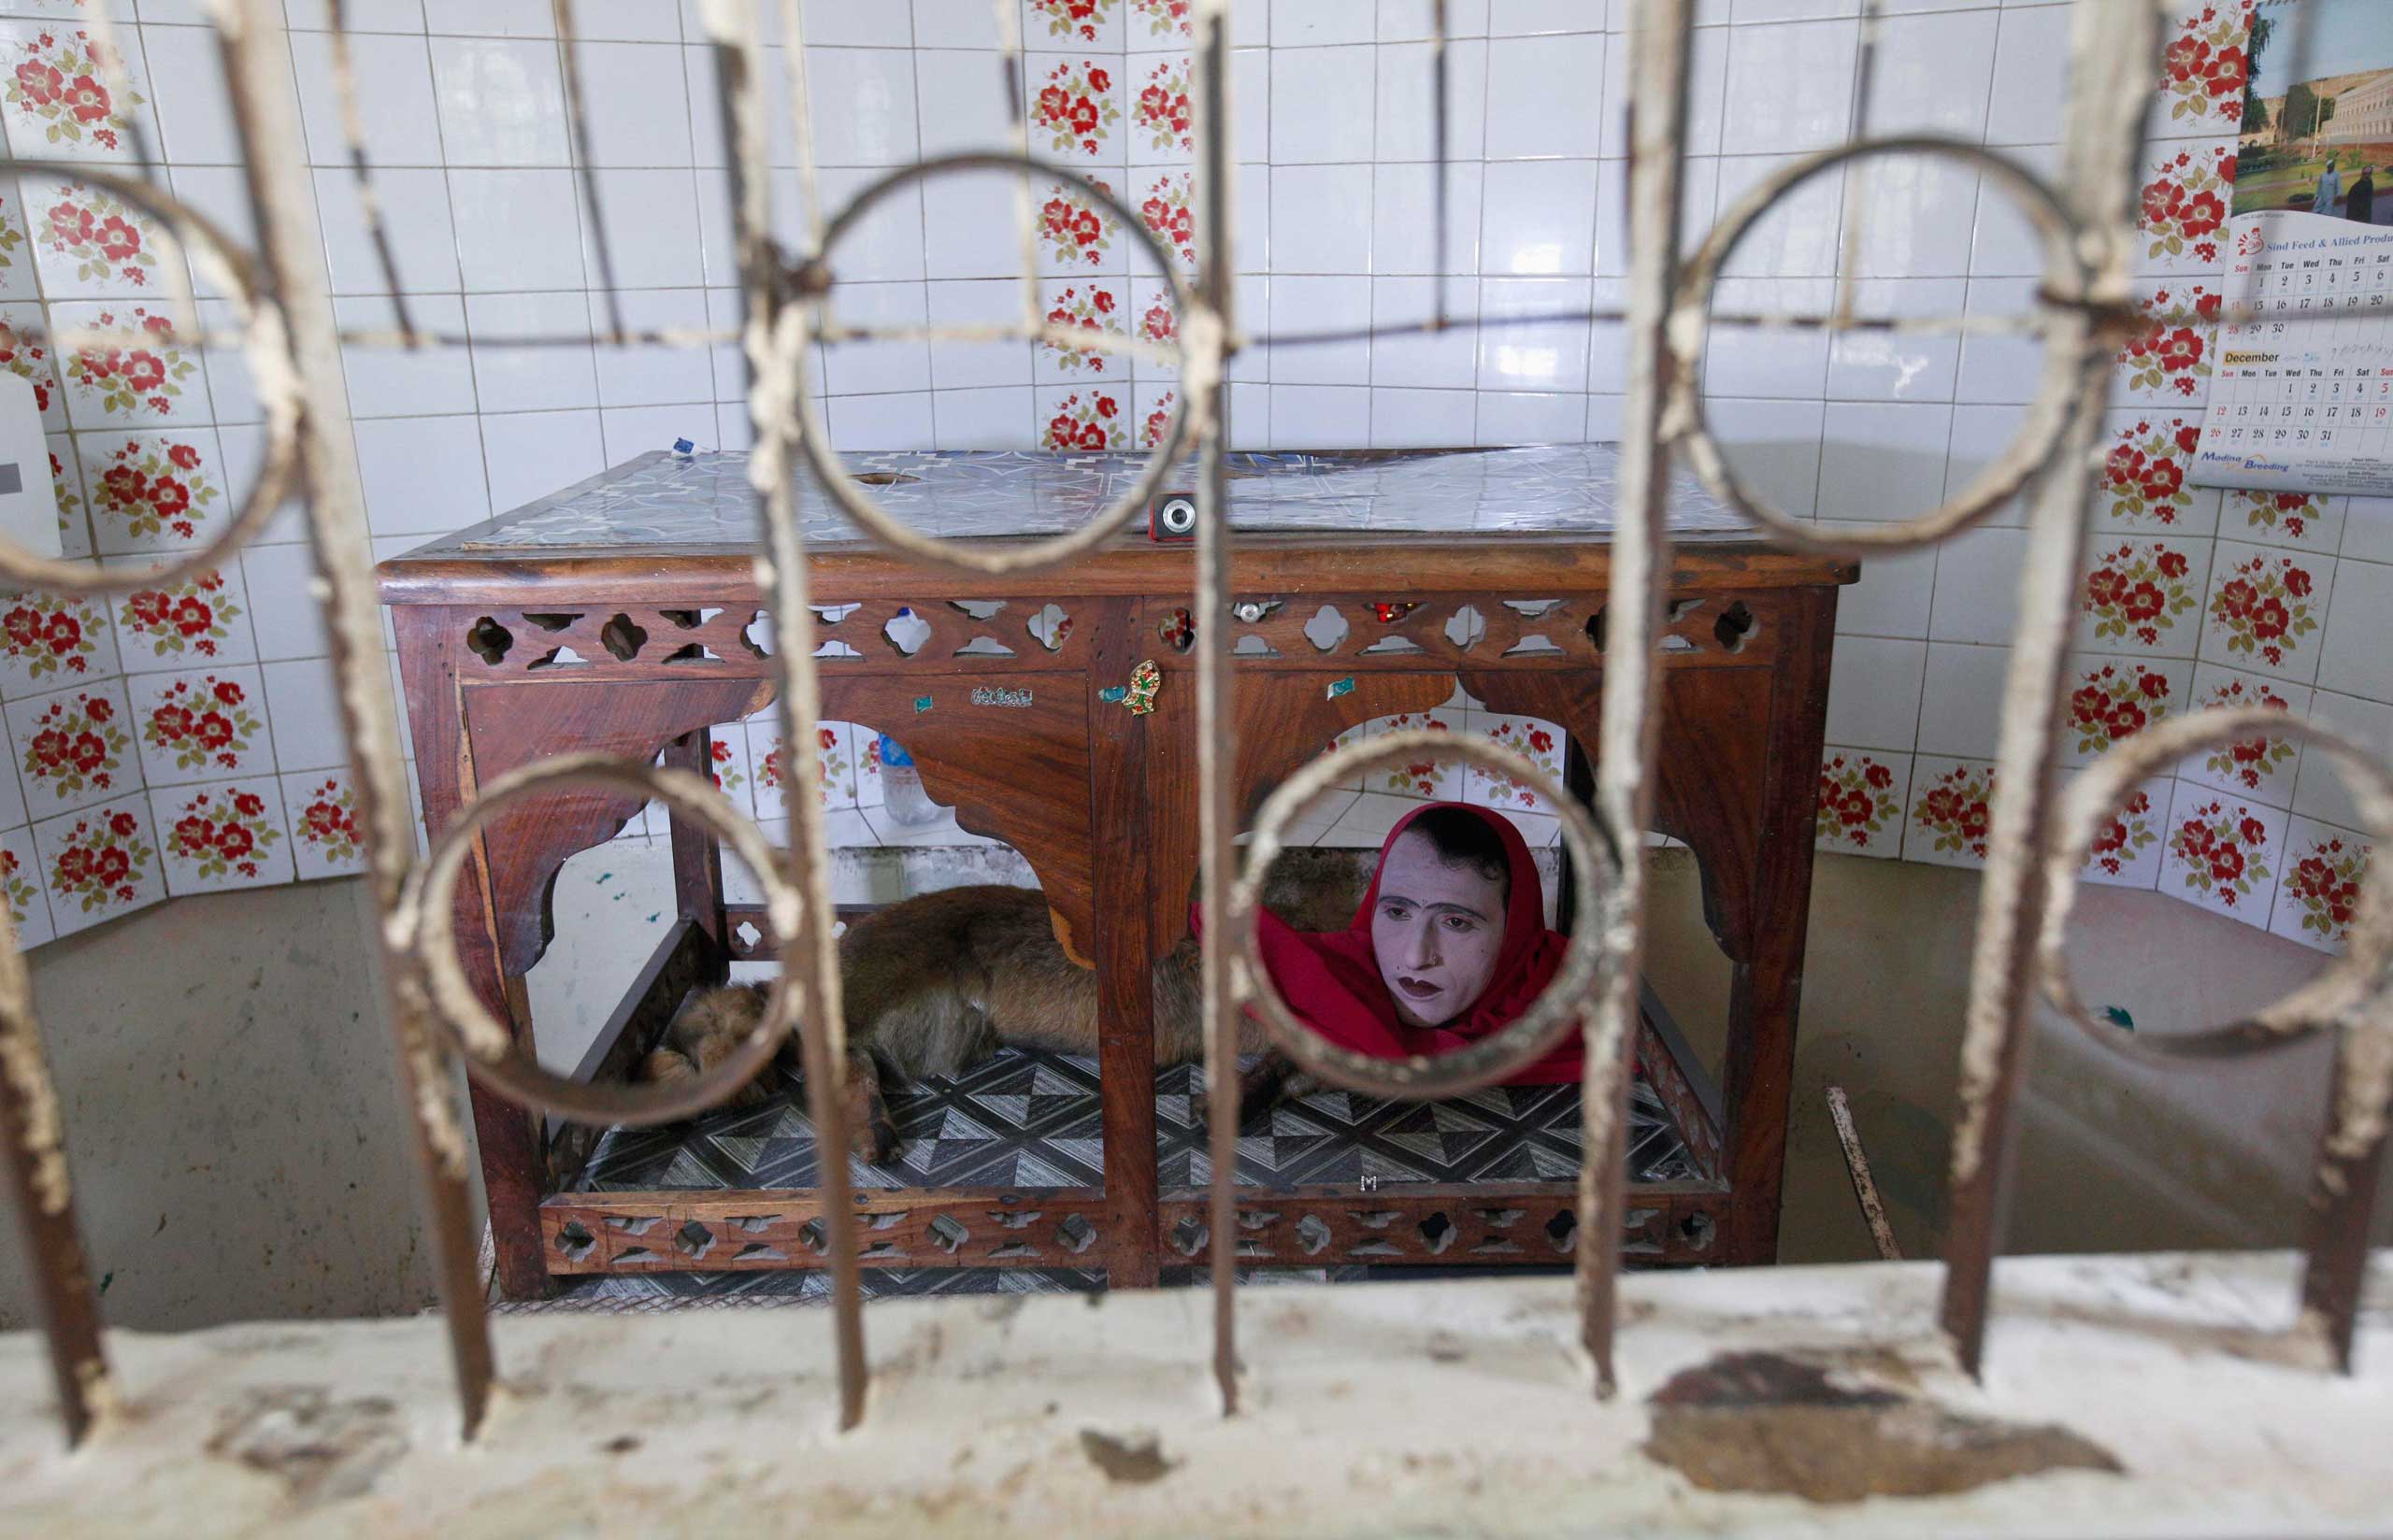 An entertainer performing as the character Mumtaz Begum, a fox-human hybrid creature, sits inside a wooden canopy in a small room called Mumtaz Palace to amuse visitors at Karachi Zoo in Karachi, June 20, 2014.